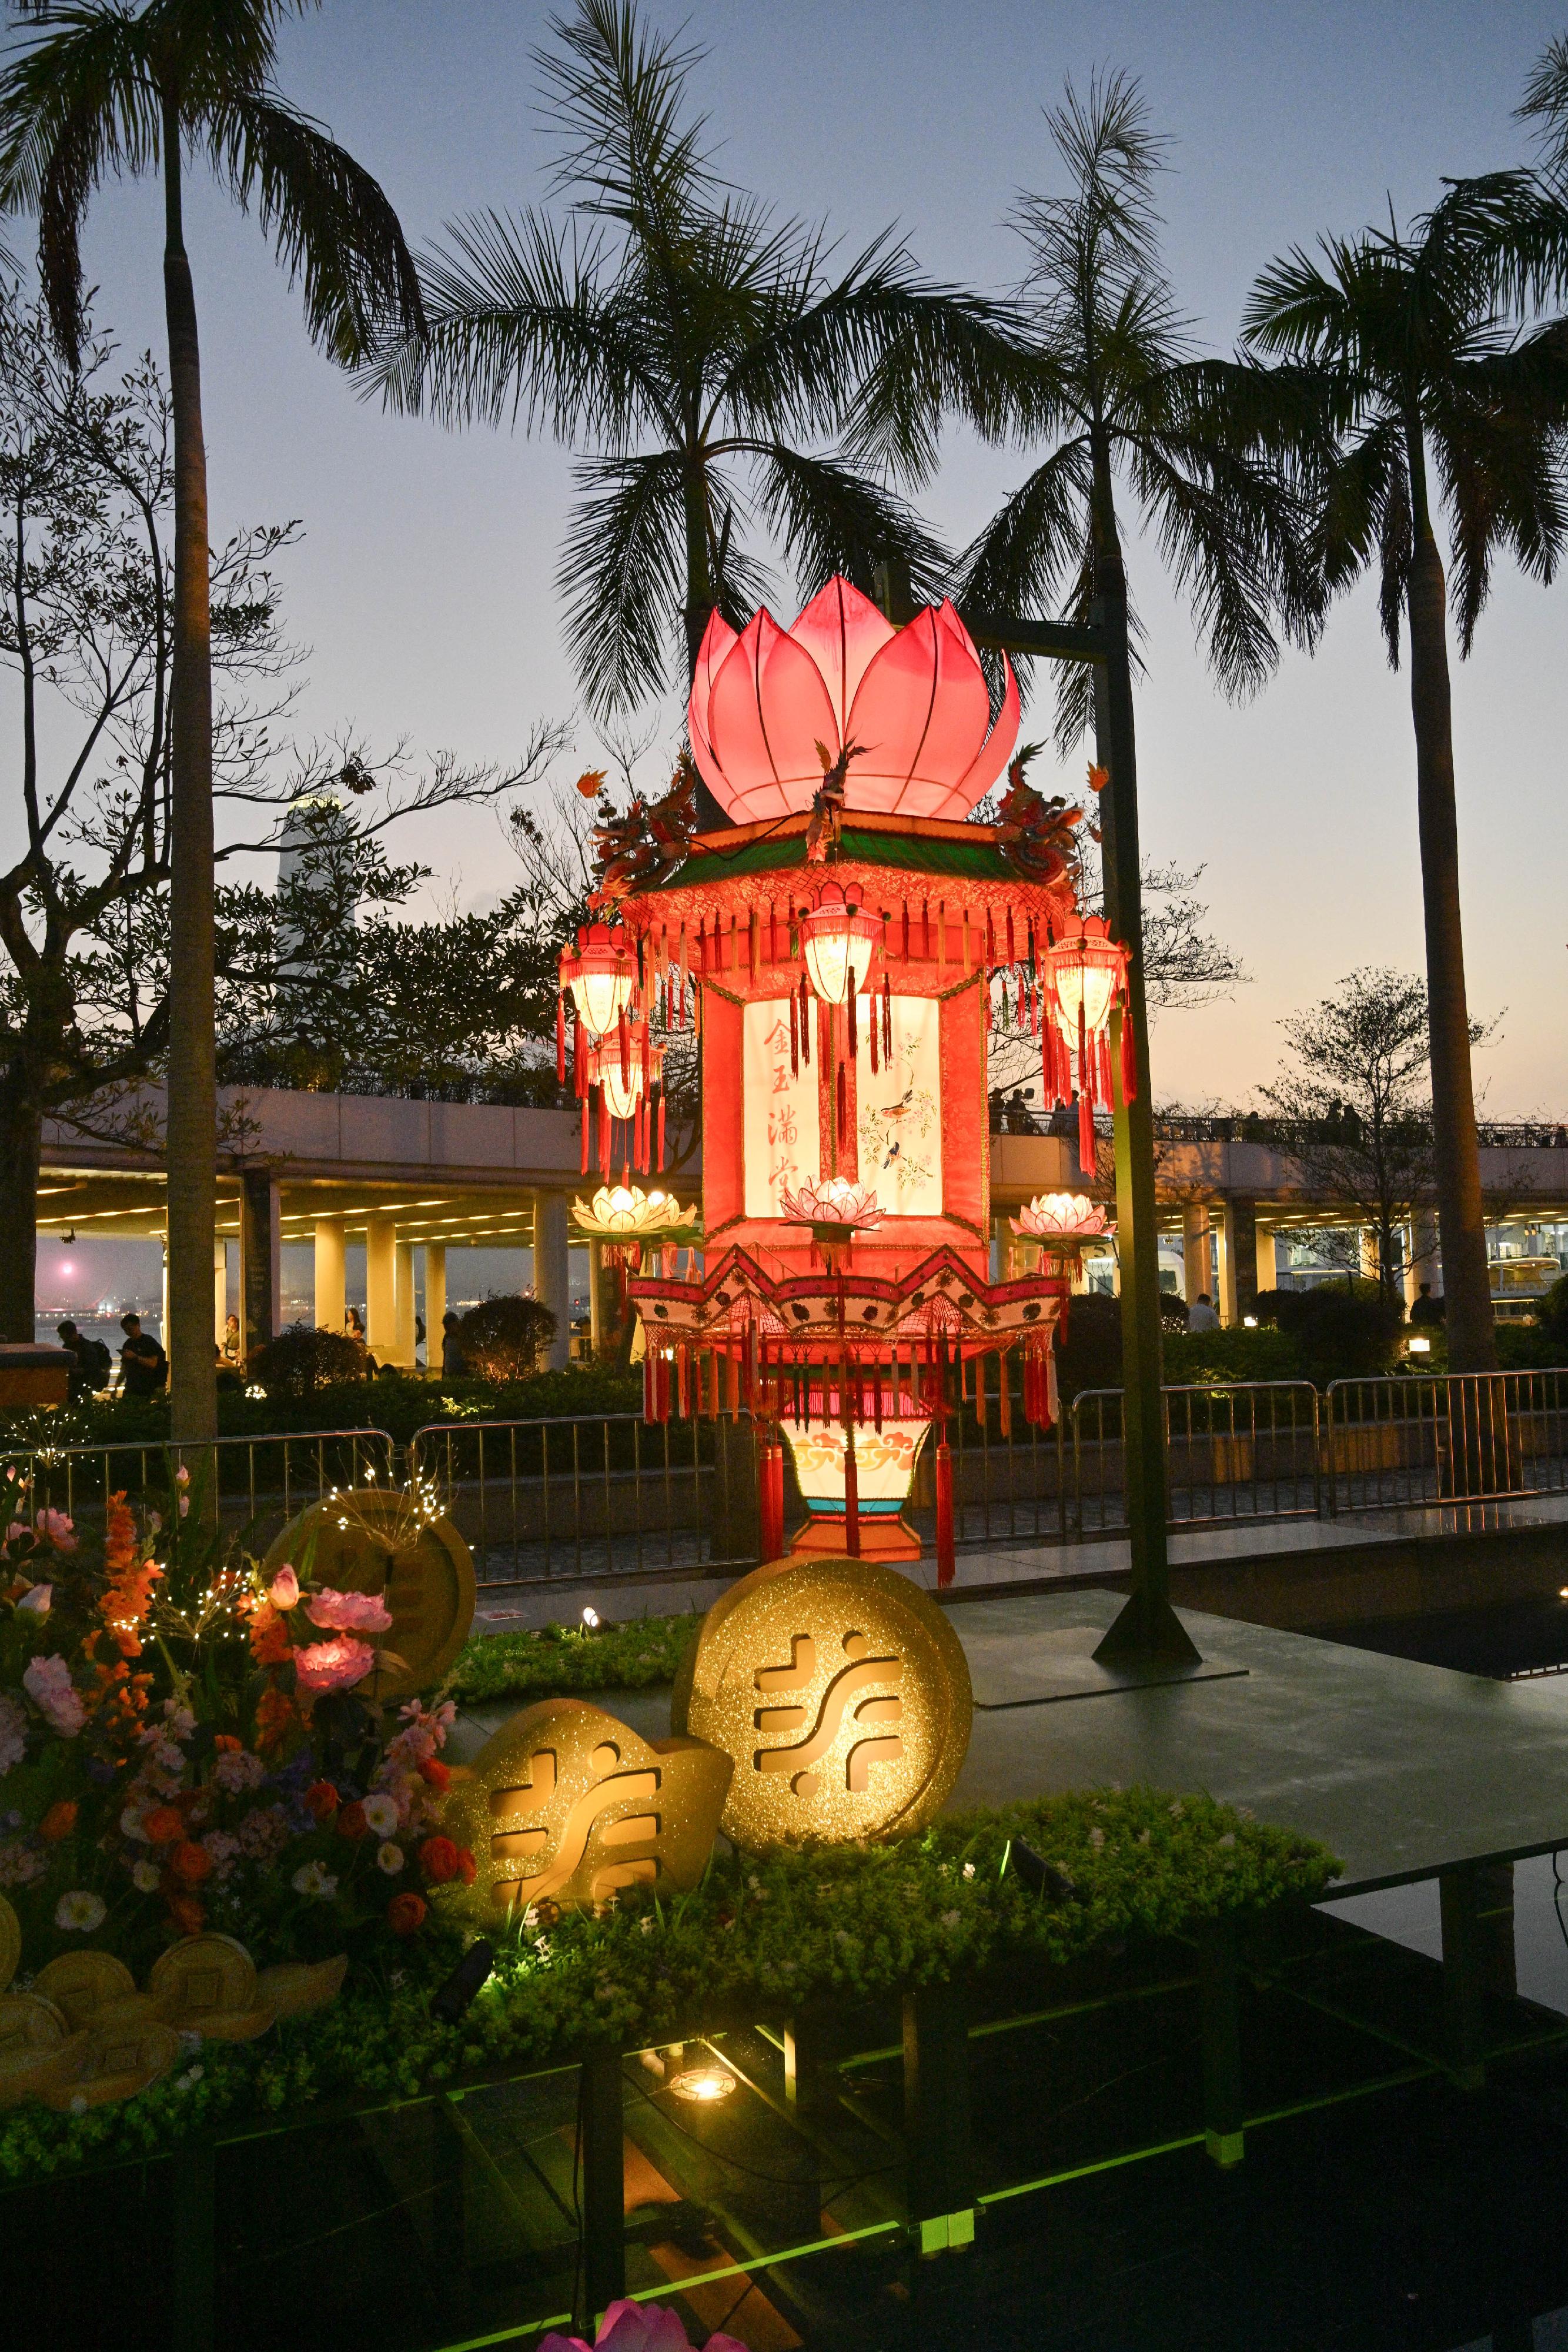 The Leisure and Cultural Services Department is presenting the Lunar New Year Lantern Display "Dancing Dragon with Lanterns to Greet the New Year" at the Hong Kong Cultural Centre Piazza from today (February 2) until February 25 to ring in the Year of the Dragon with the public. In addition to the green dragon, beautiful palace lanterns are also on display to boost festive atmosphere.